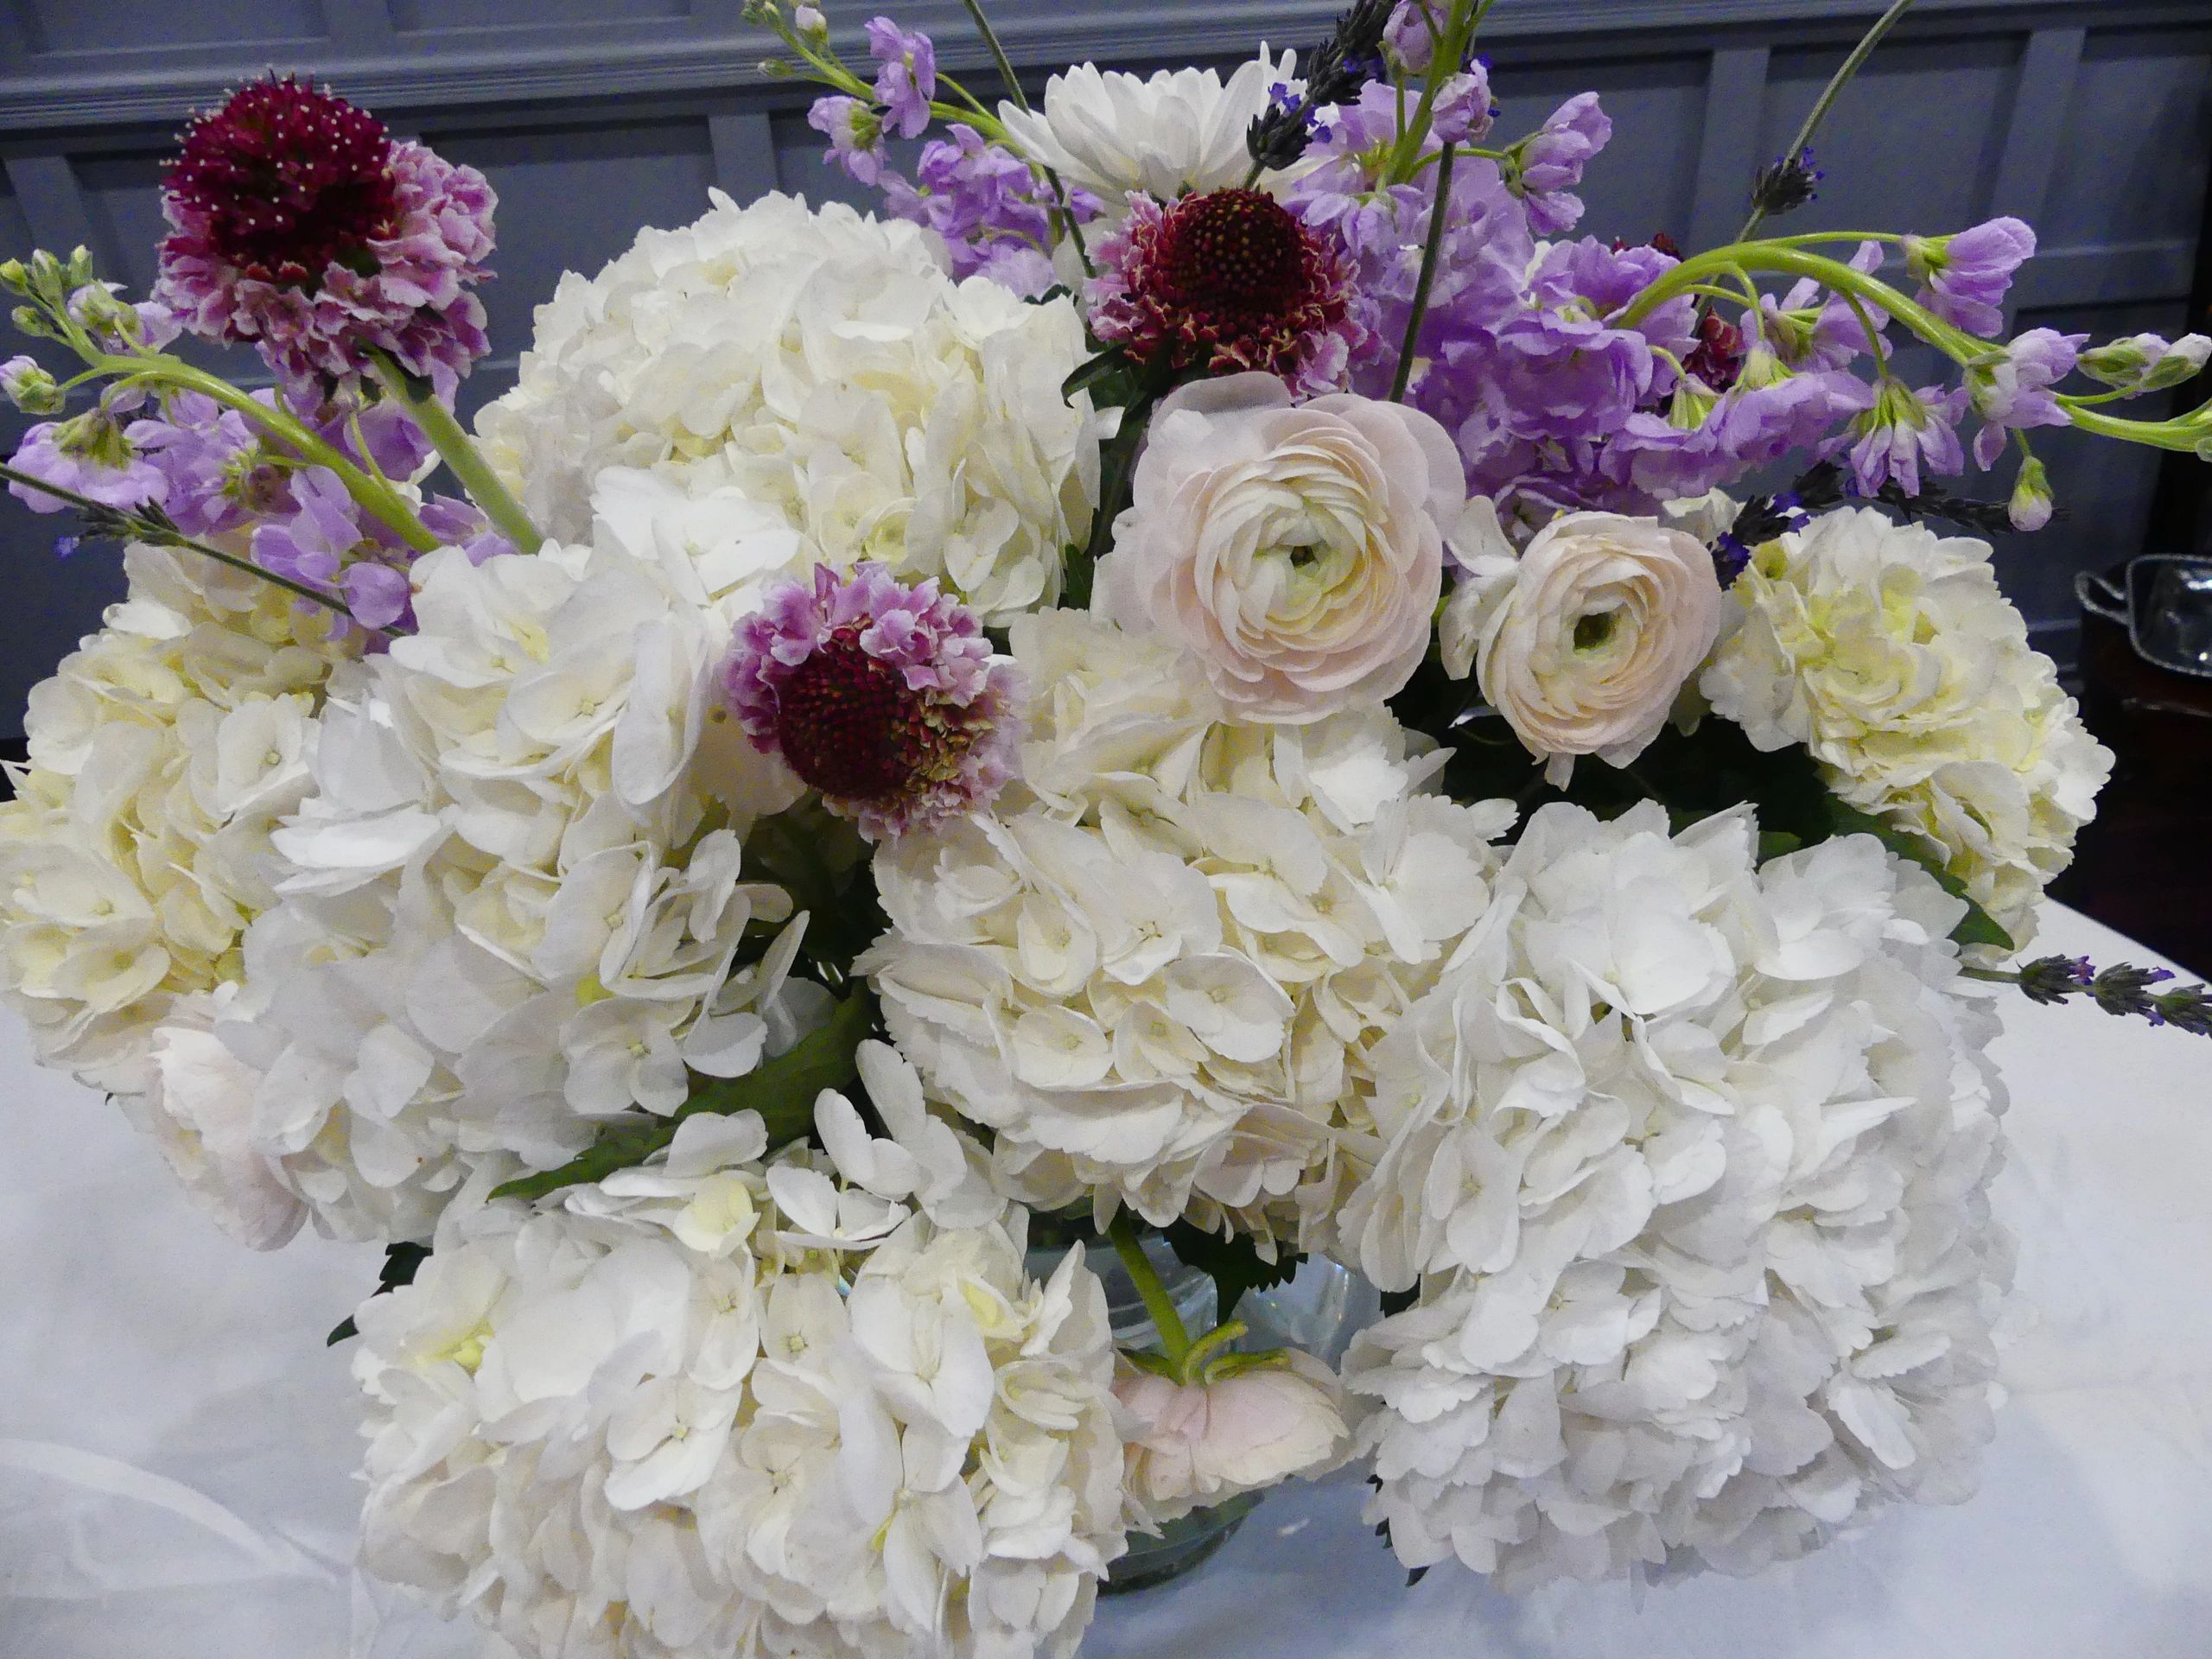 Wedding and Party Decor - Florals with white hydrangea, sweet pea, ranunculus and scabiosa